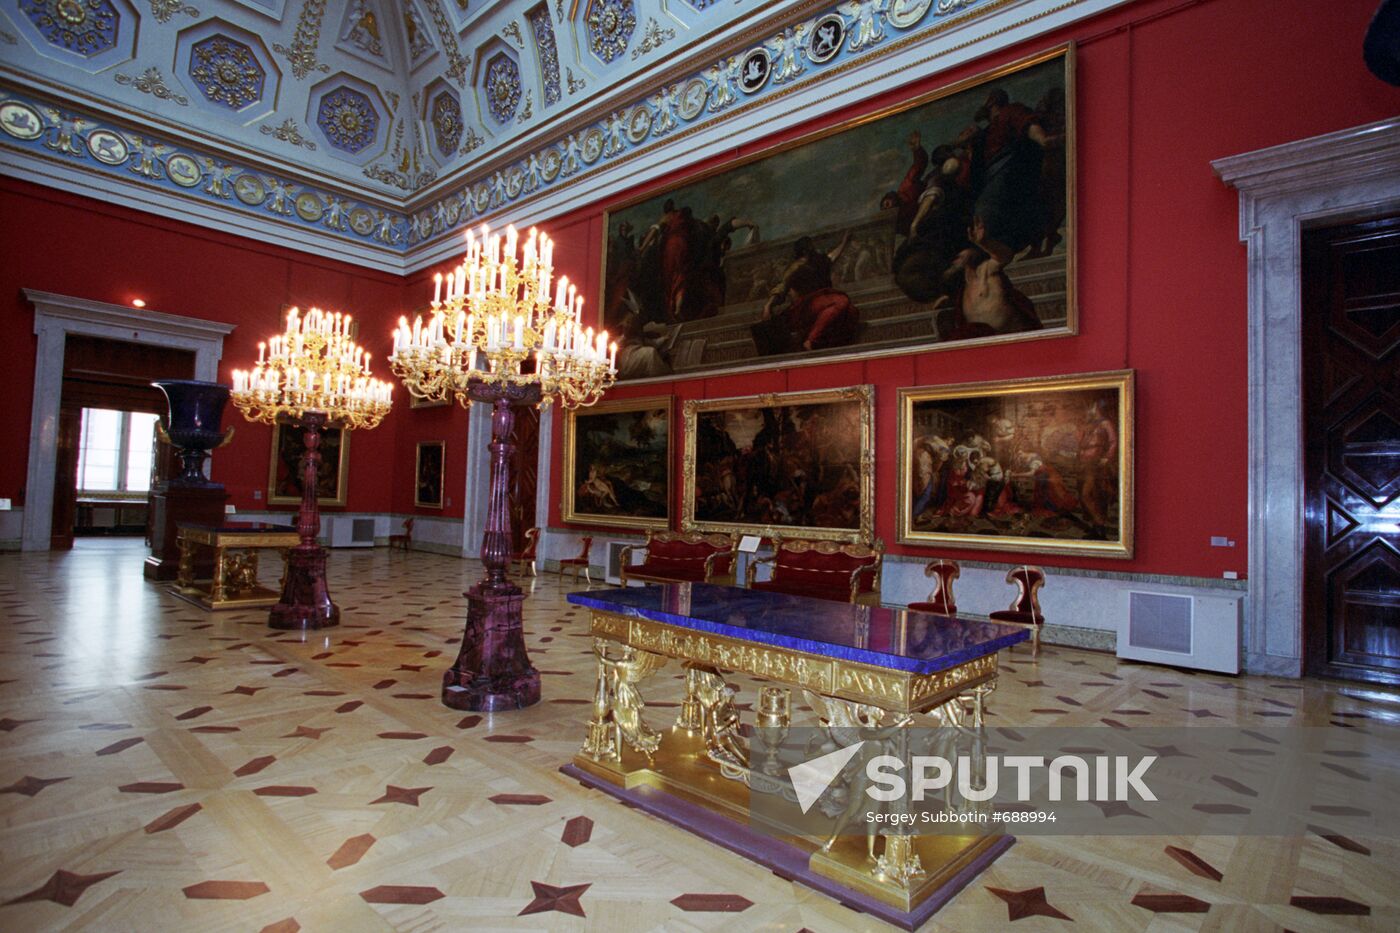 The State Hermitage in St. Petersburg